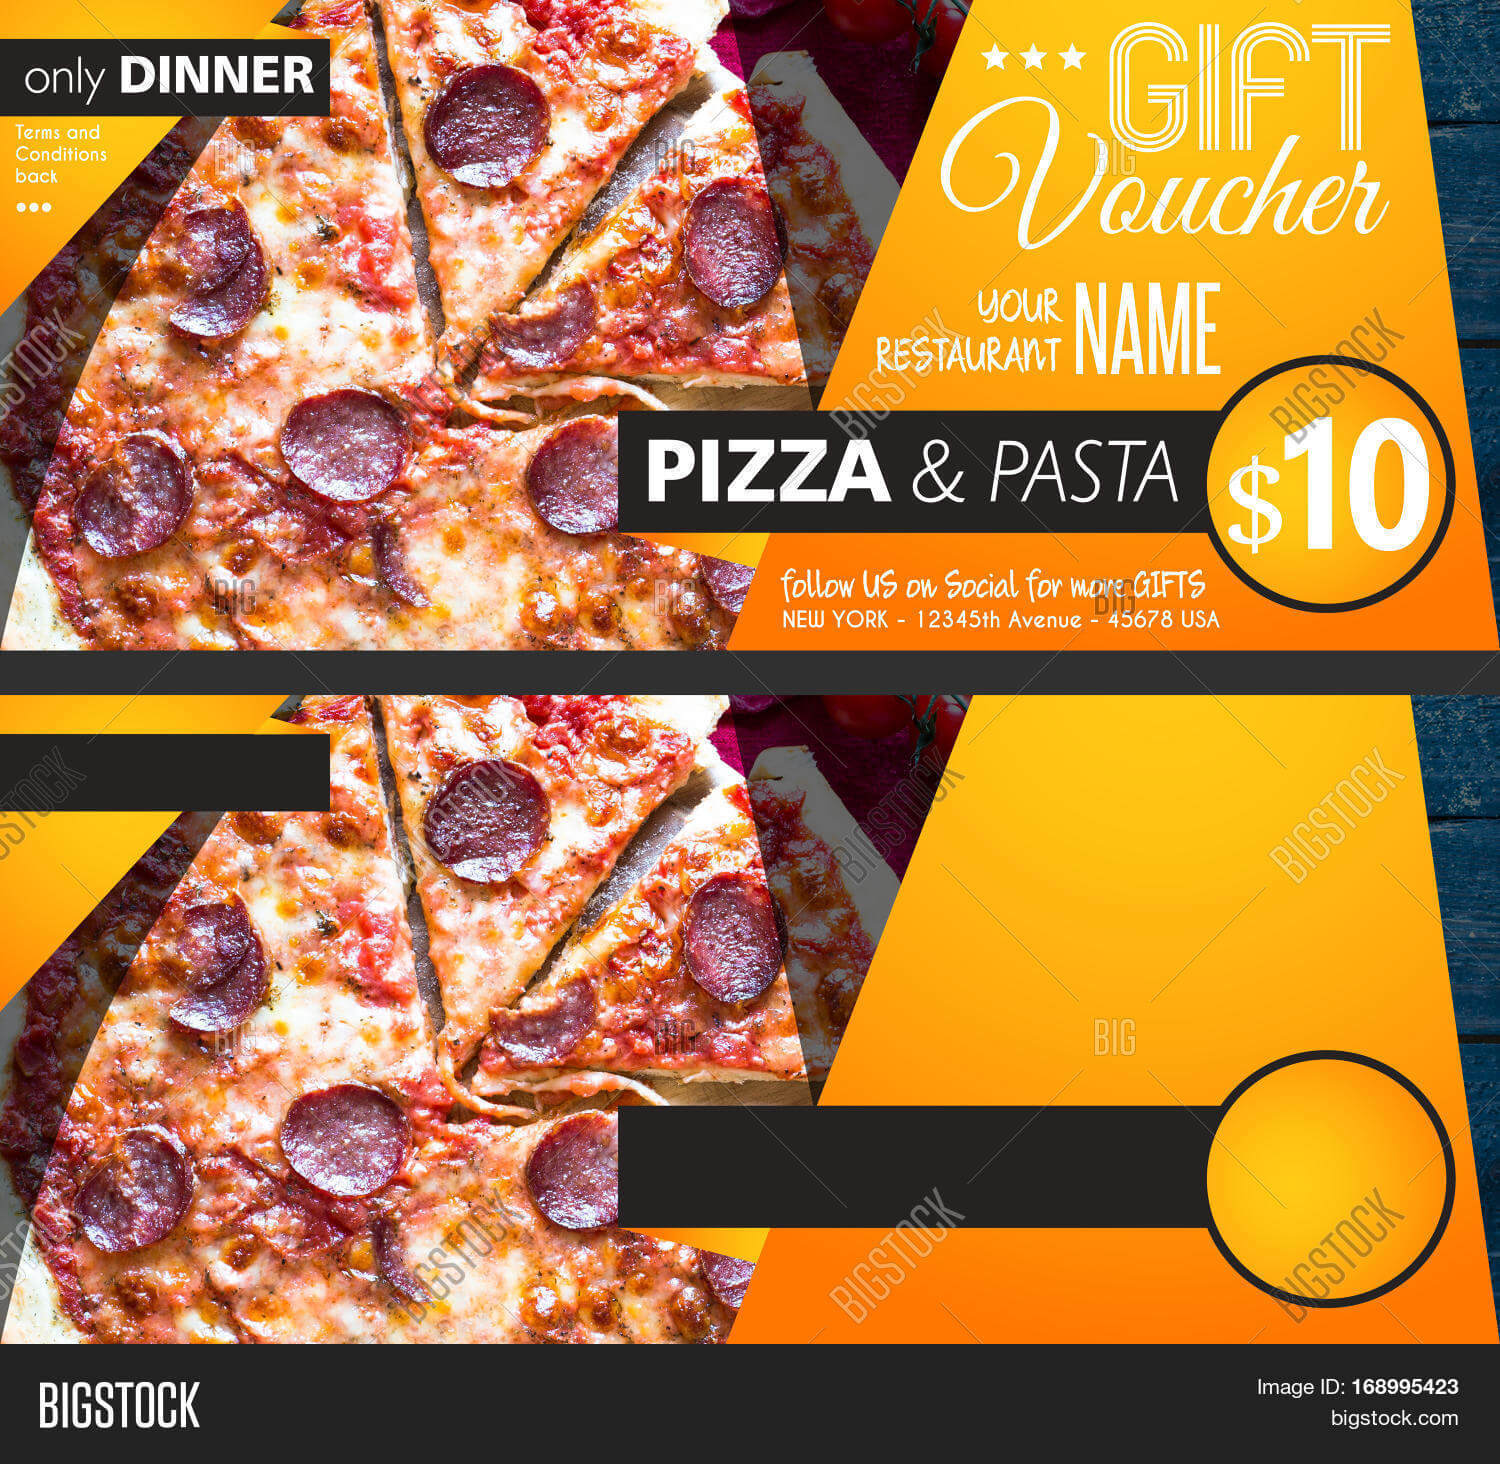 Restaurant Gift Image & Photo (Free Trial) | Bigstock With Regard To Pizza Gift Certificate Template